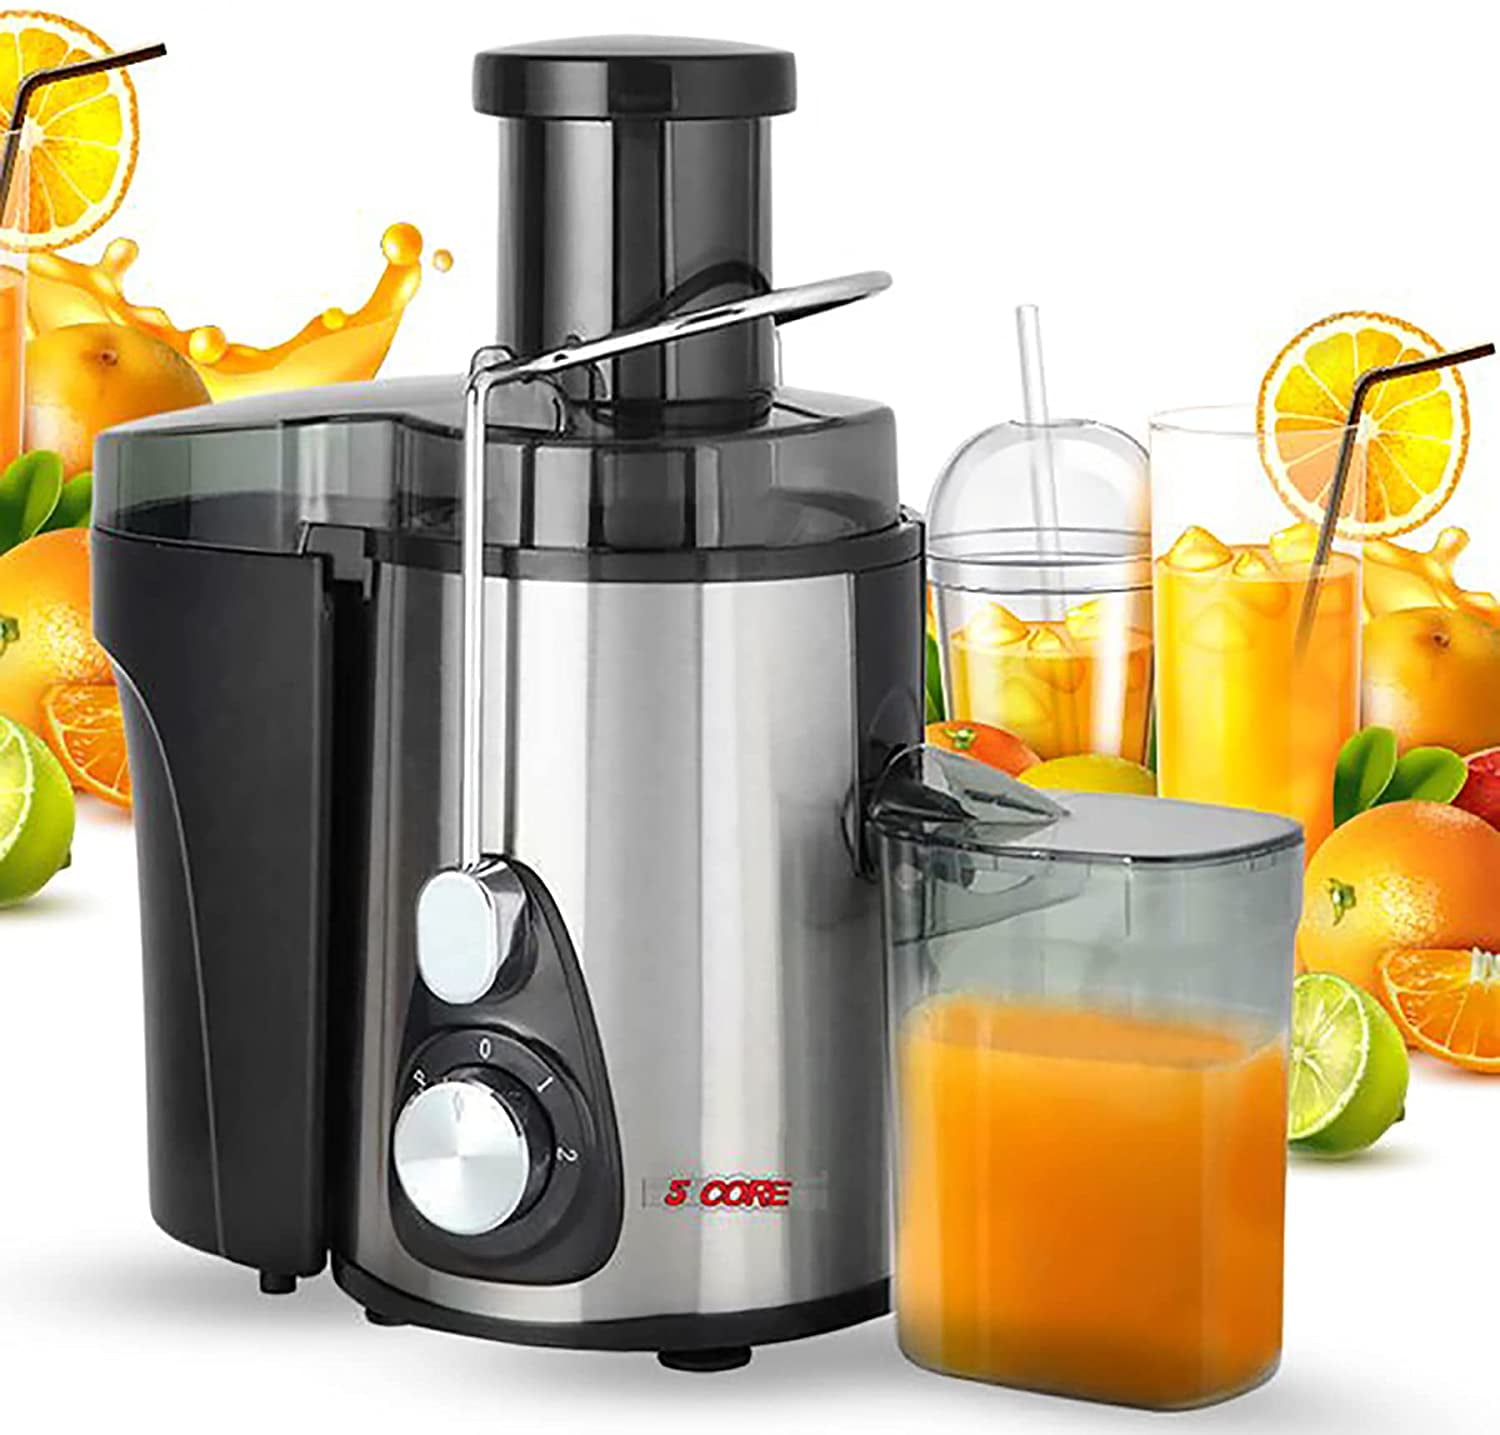 Easy to Clean & BPA Free,Black Juicer Extractor Picberm PB2312A Wide Mouth Juicer Machines Powerful Juicer with Plus Pulse Function 3 Speed Centrifugal Juicer for Fruit and Vegetable 800W/20000RPM 